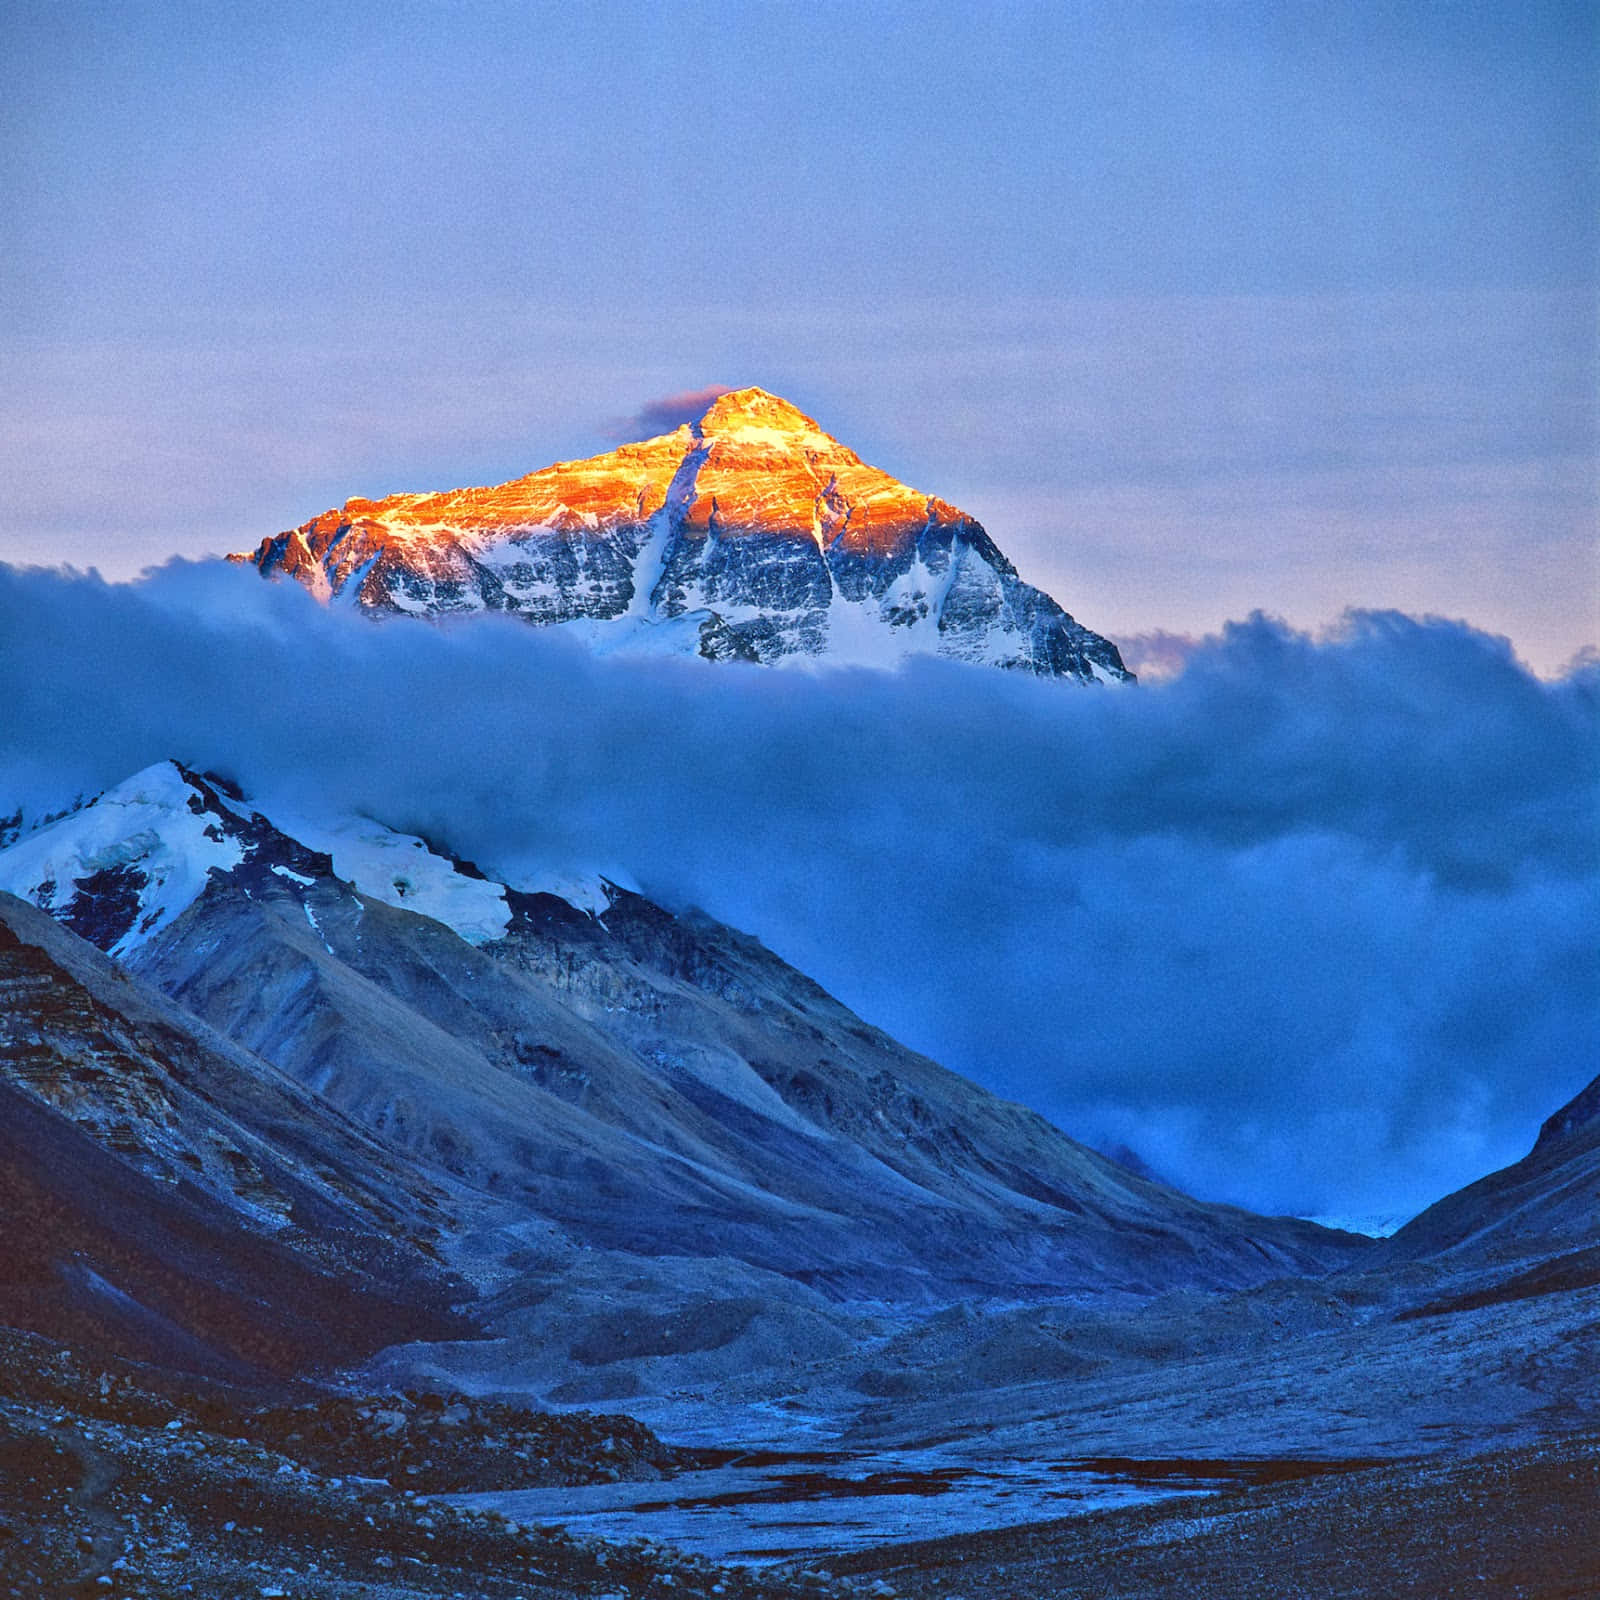 Standing tall and majestic, Mount Everest soars above the clouds